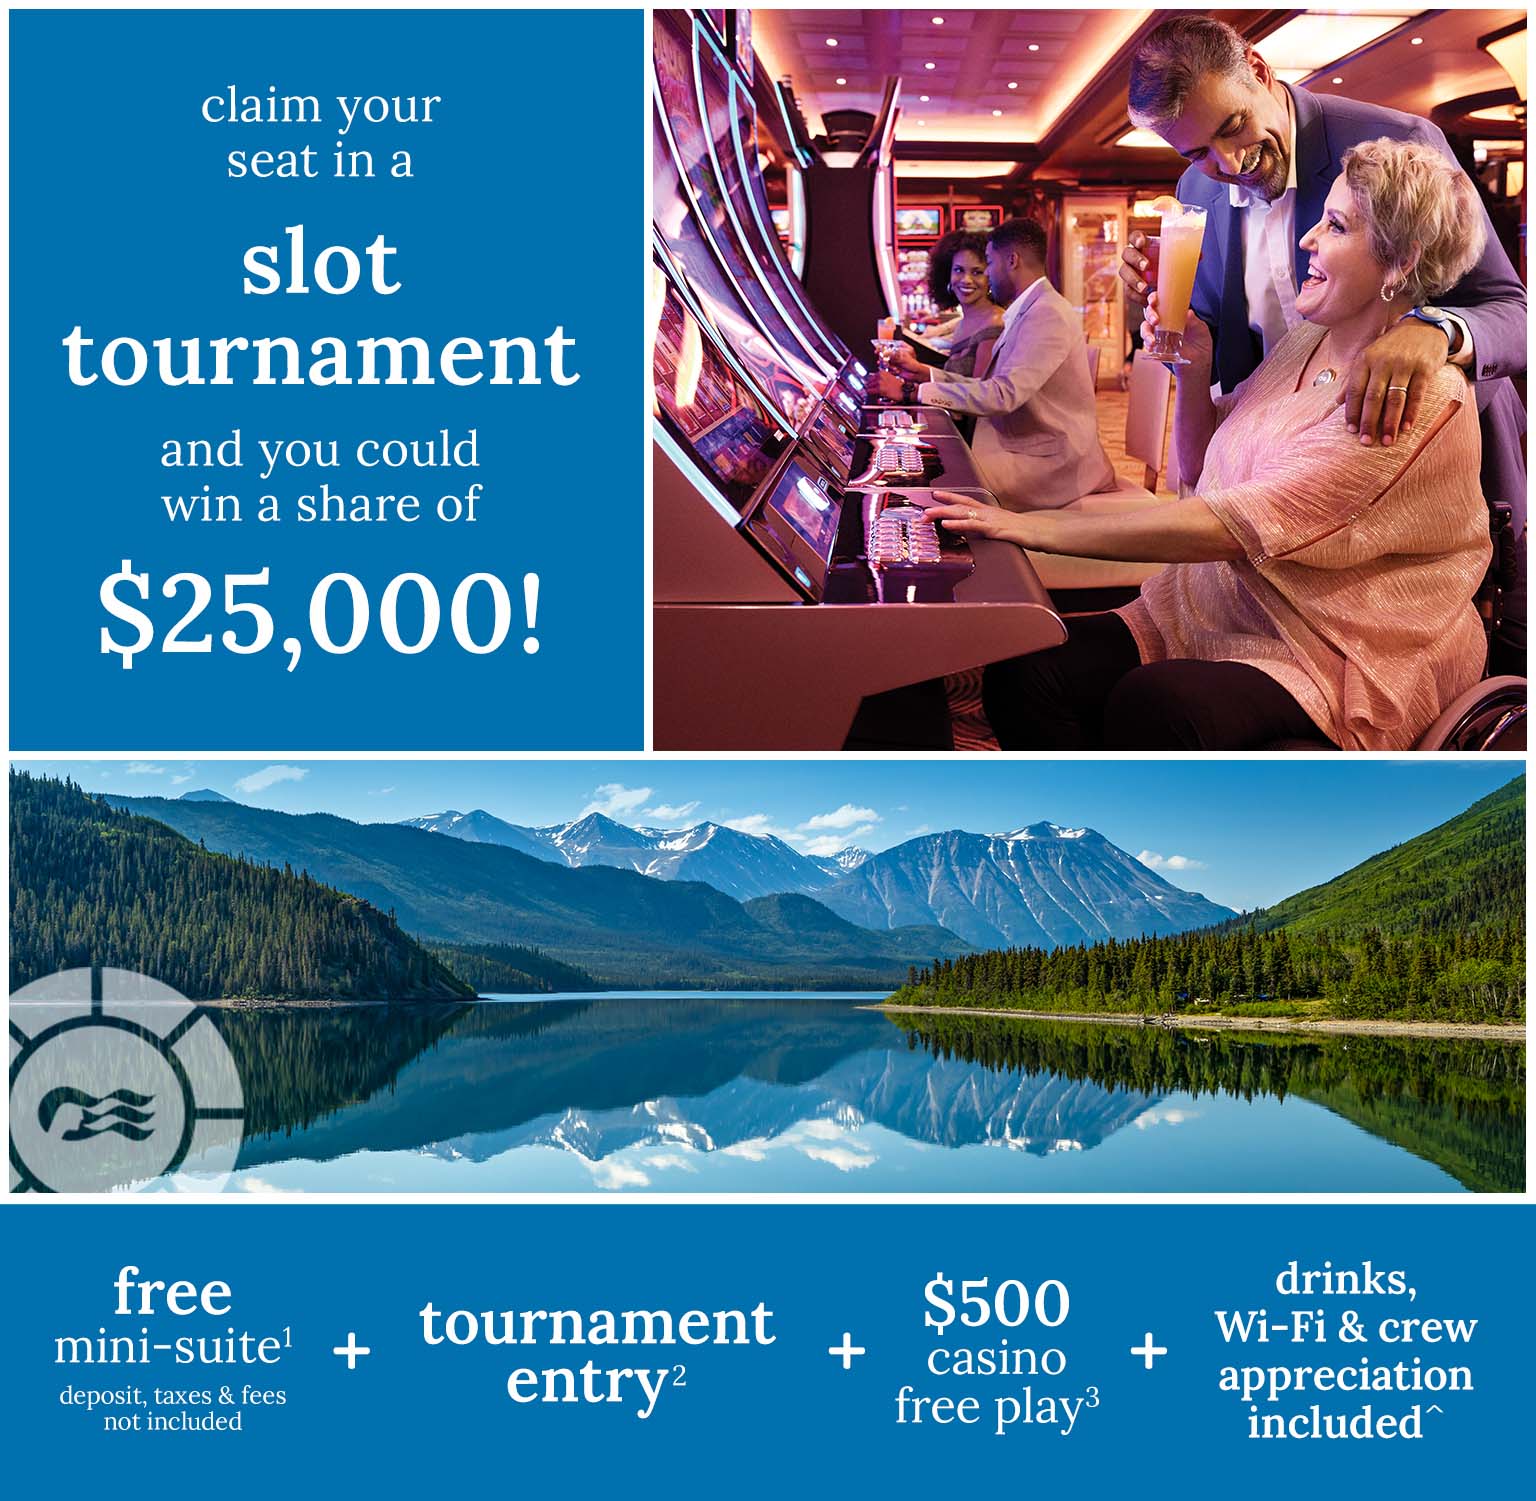 Claim your seat in a slot tournament and you could win a share of $25,000 - free mini-suite(1) + tournament entry(2) + $500 casino free play(3) + drinks, wi-fi & crew appreciation included^